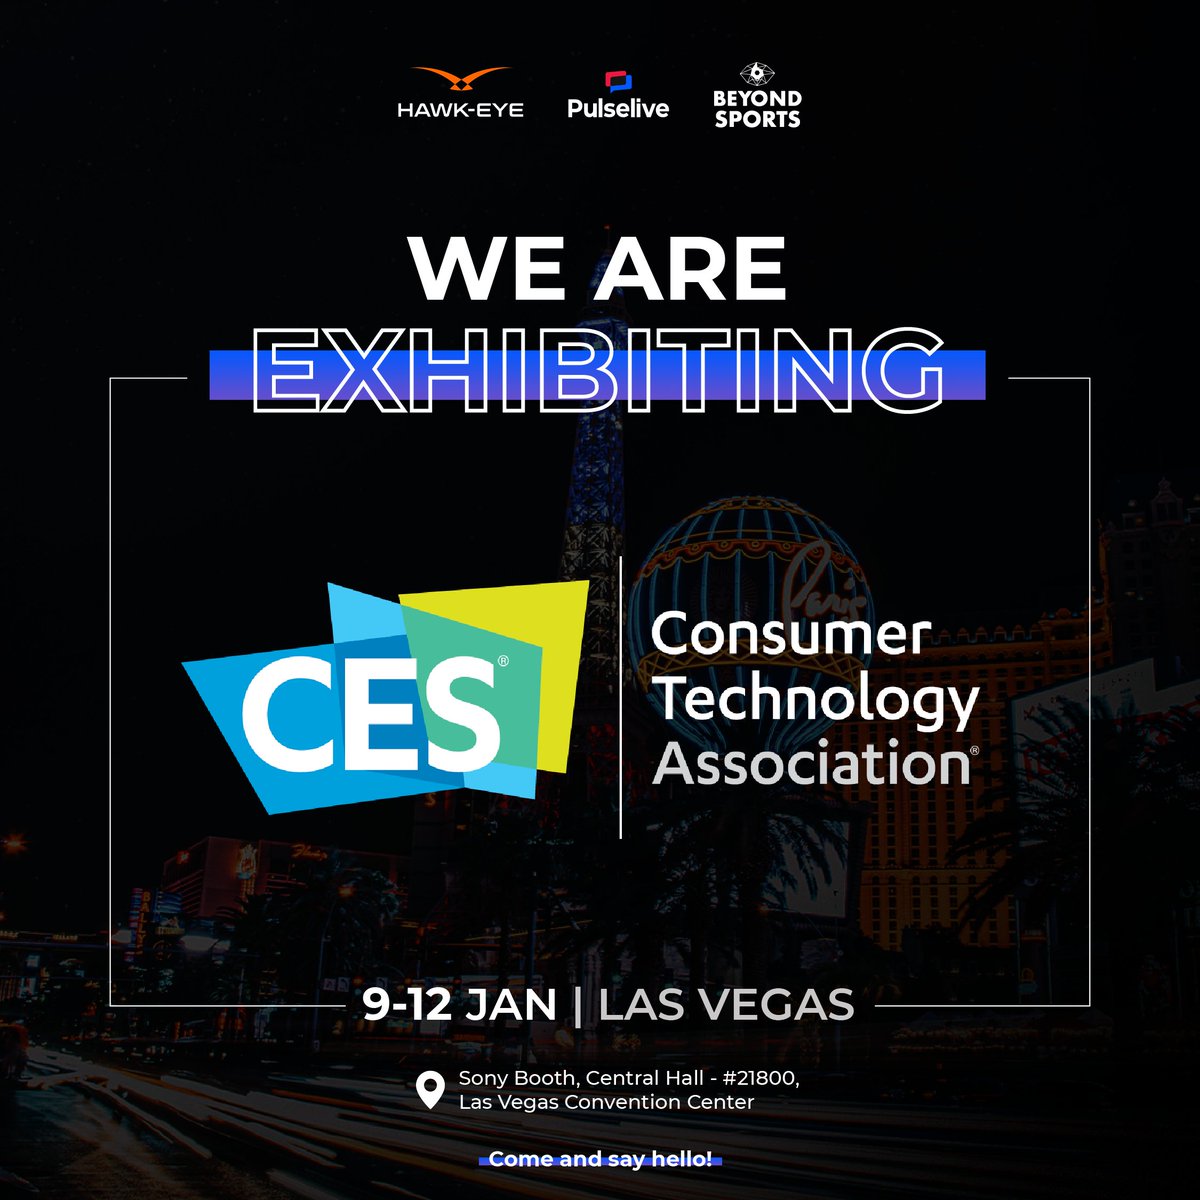 We're stoked to be kicking off the year here in Las Vegas at #CES!🇺🇸 You can find us at the @Sony booth where you can get hands-on with our tech and learn more about the future of sports fan experiences.⏩ Don't forget to drop by and say hi - we can't wait to see you!👋 #CES24